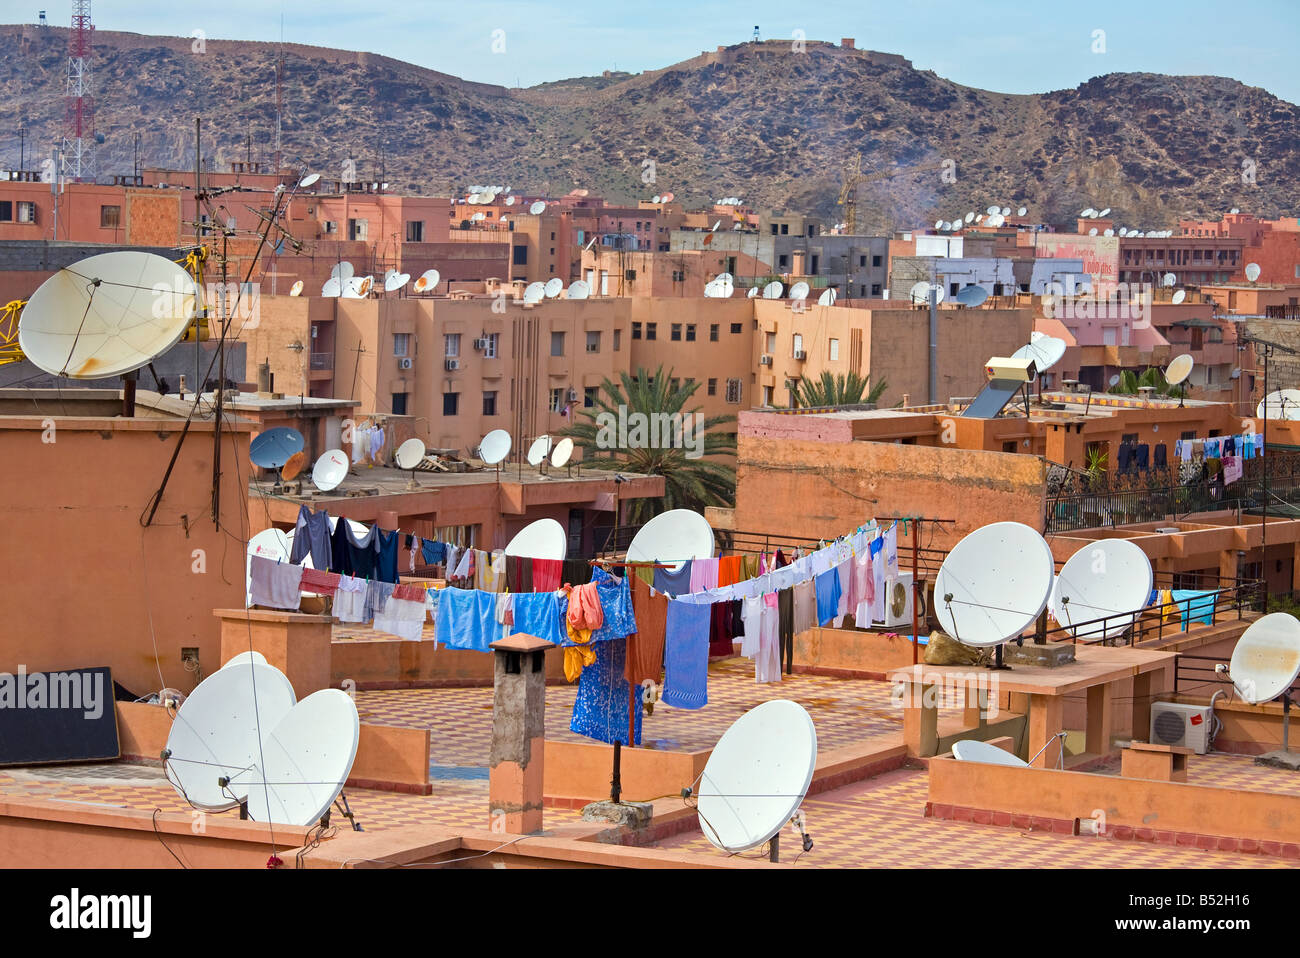 Satellite Dishes on rooftops. Africa, Morocco, Marrakesh. Stock Photo